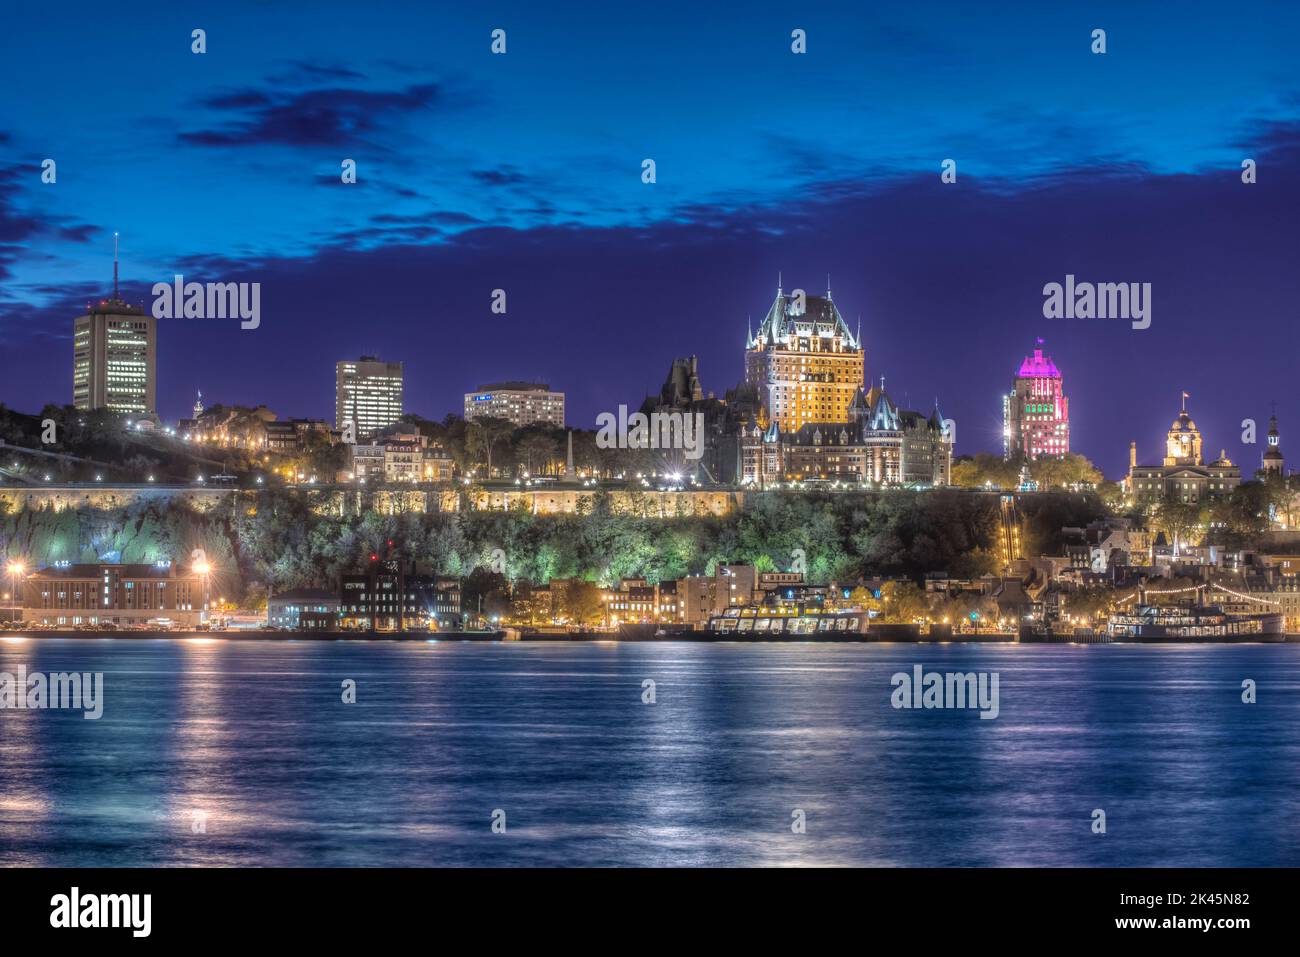 Quebec city, Chateau Frontenac and the city buildings viewed from across the St Lawrencen river. Stock Photo